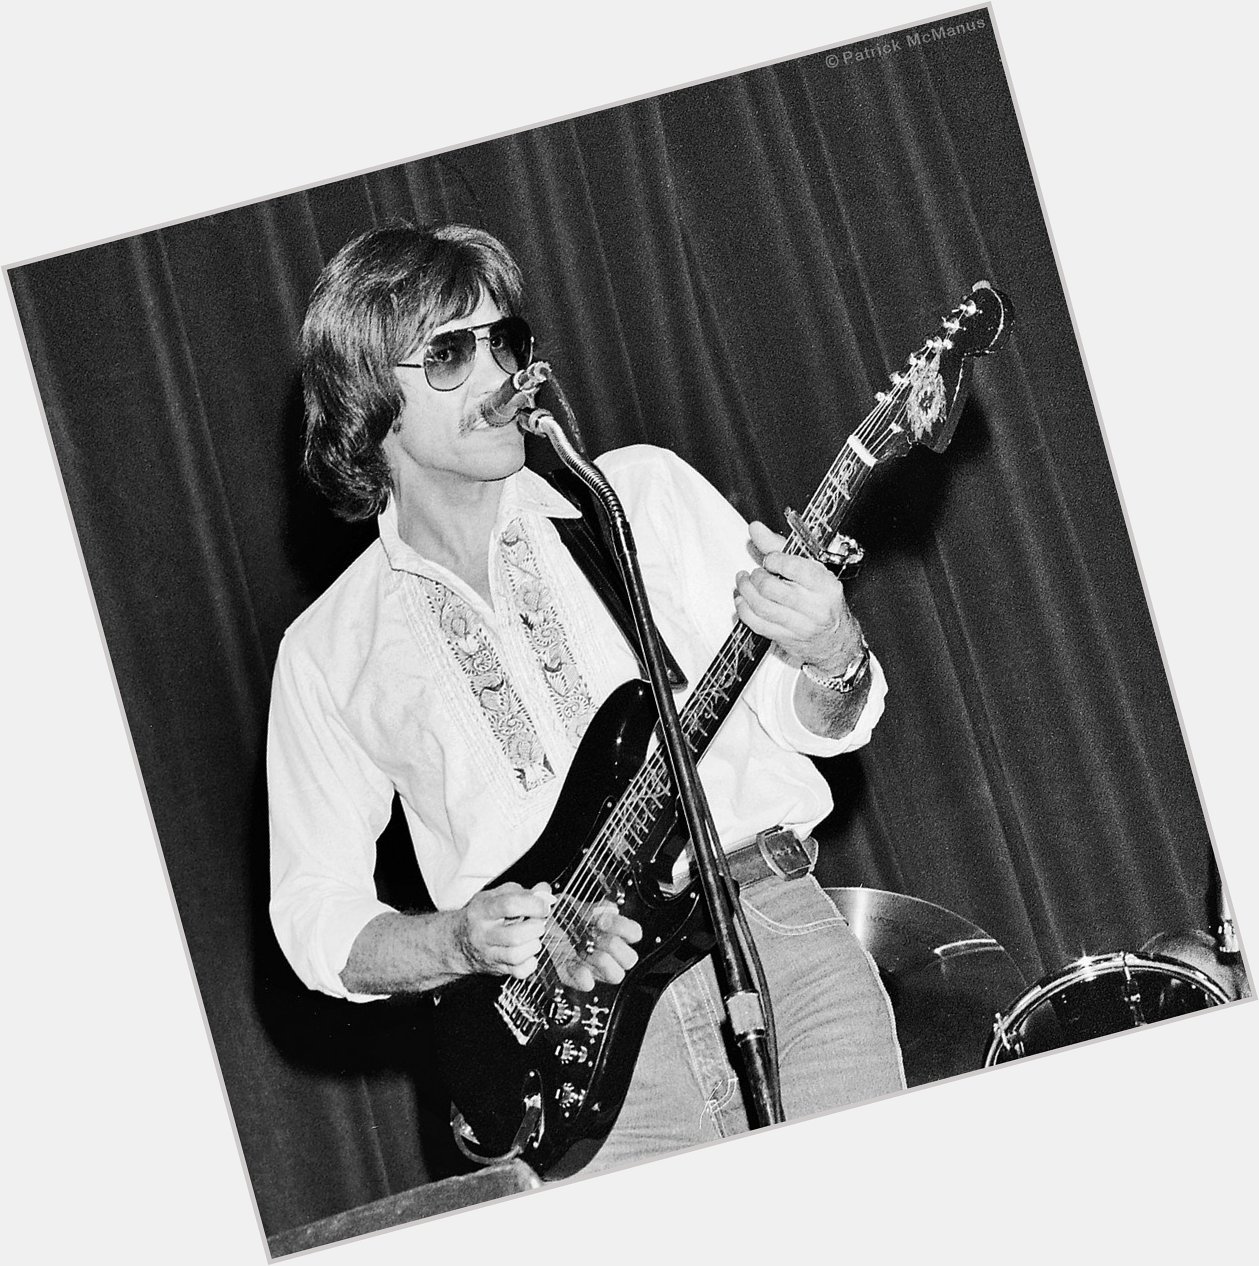 John Kay with Steppenwolf was born on this day in 1944. Happy Birthday! 